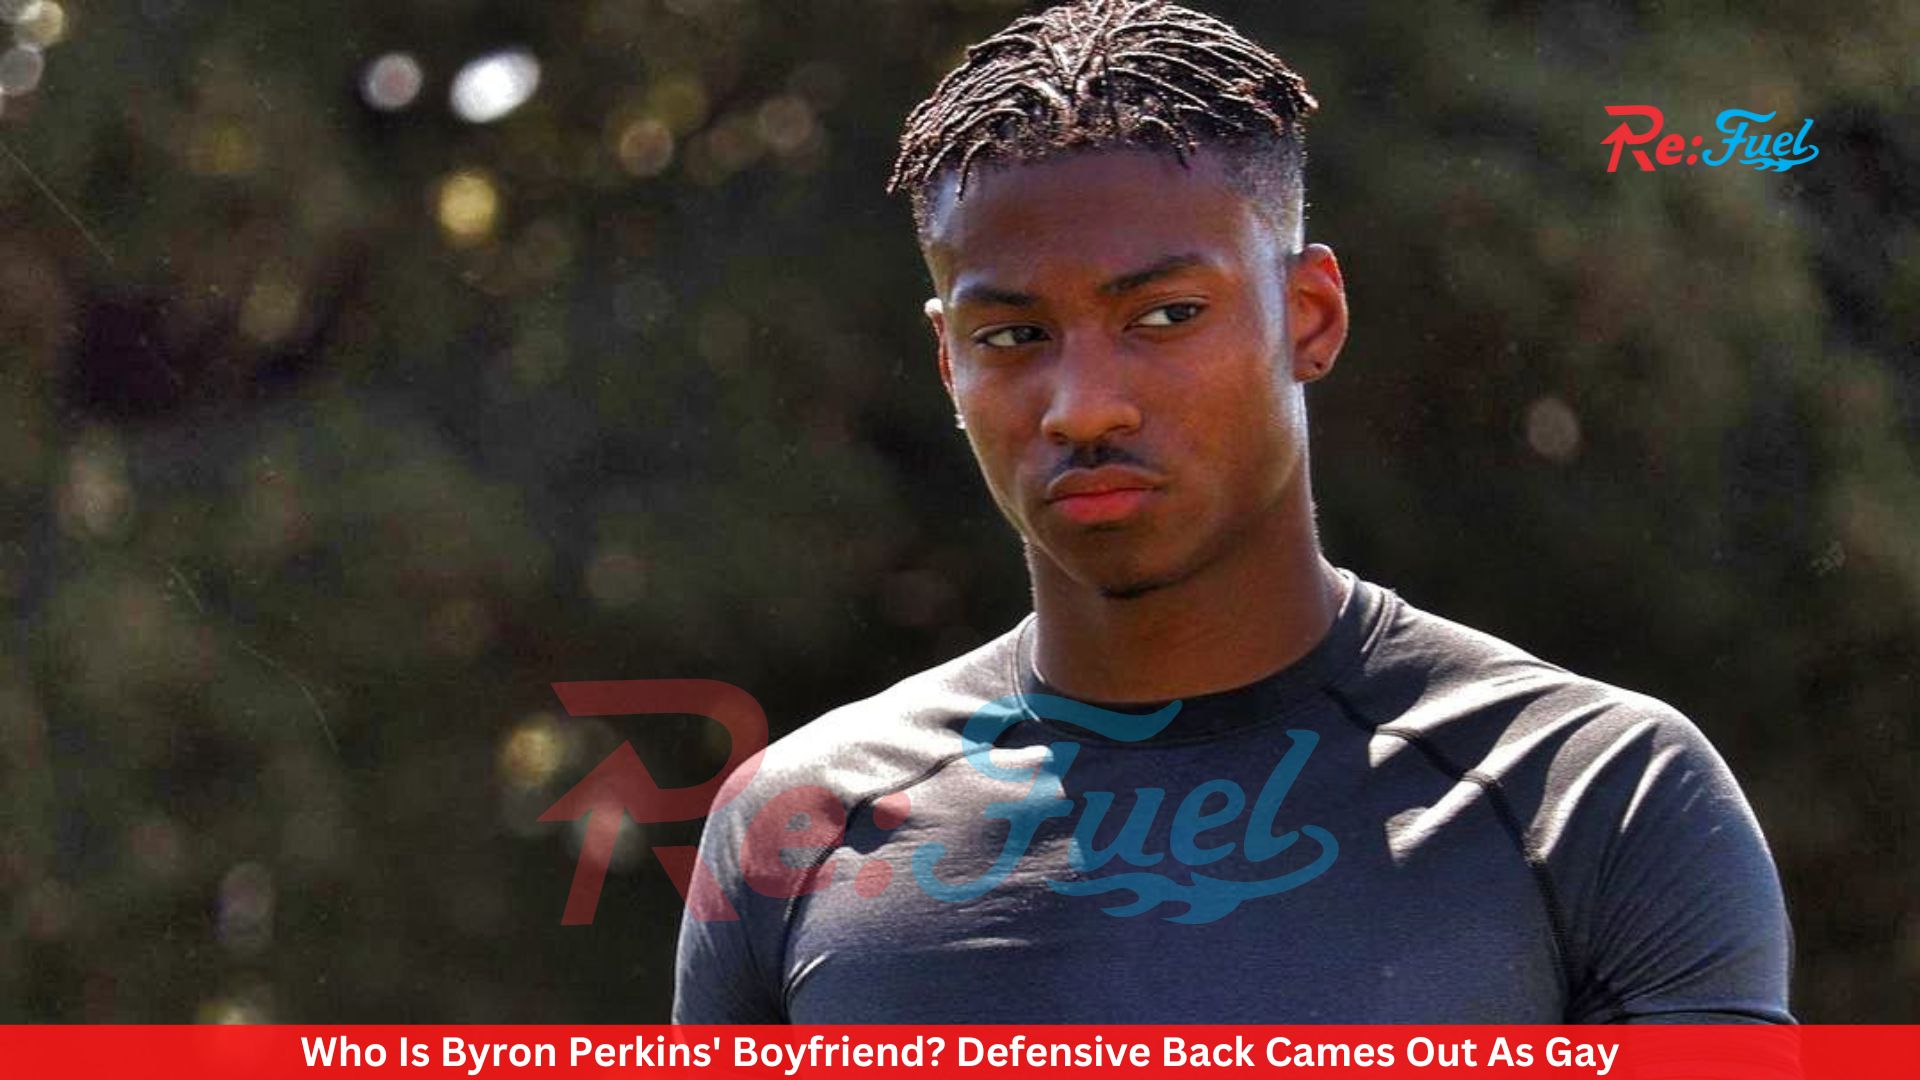 Who Is Byron Perkins' Boyfriend? Defensive Back Cames Out As Gay